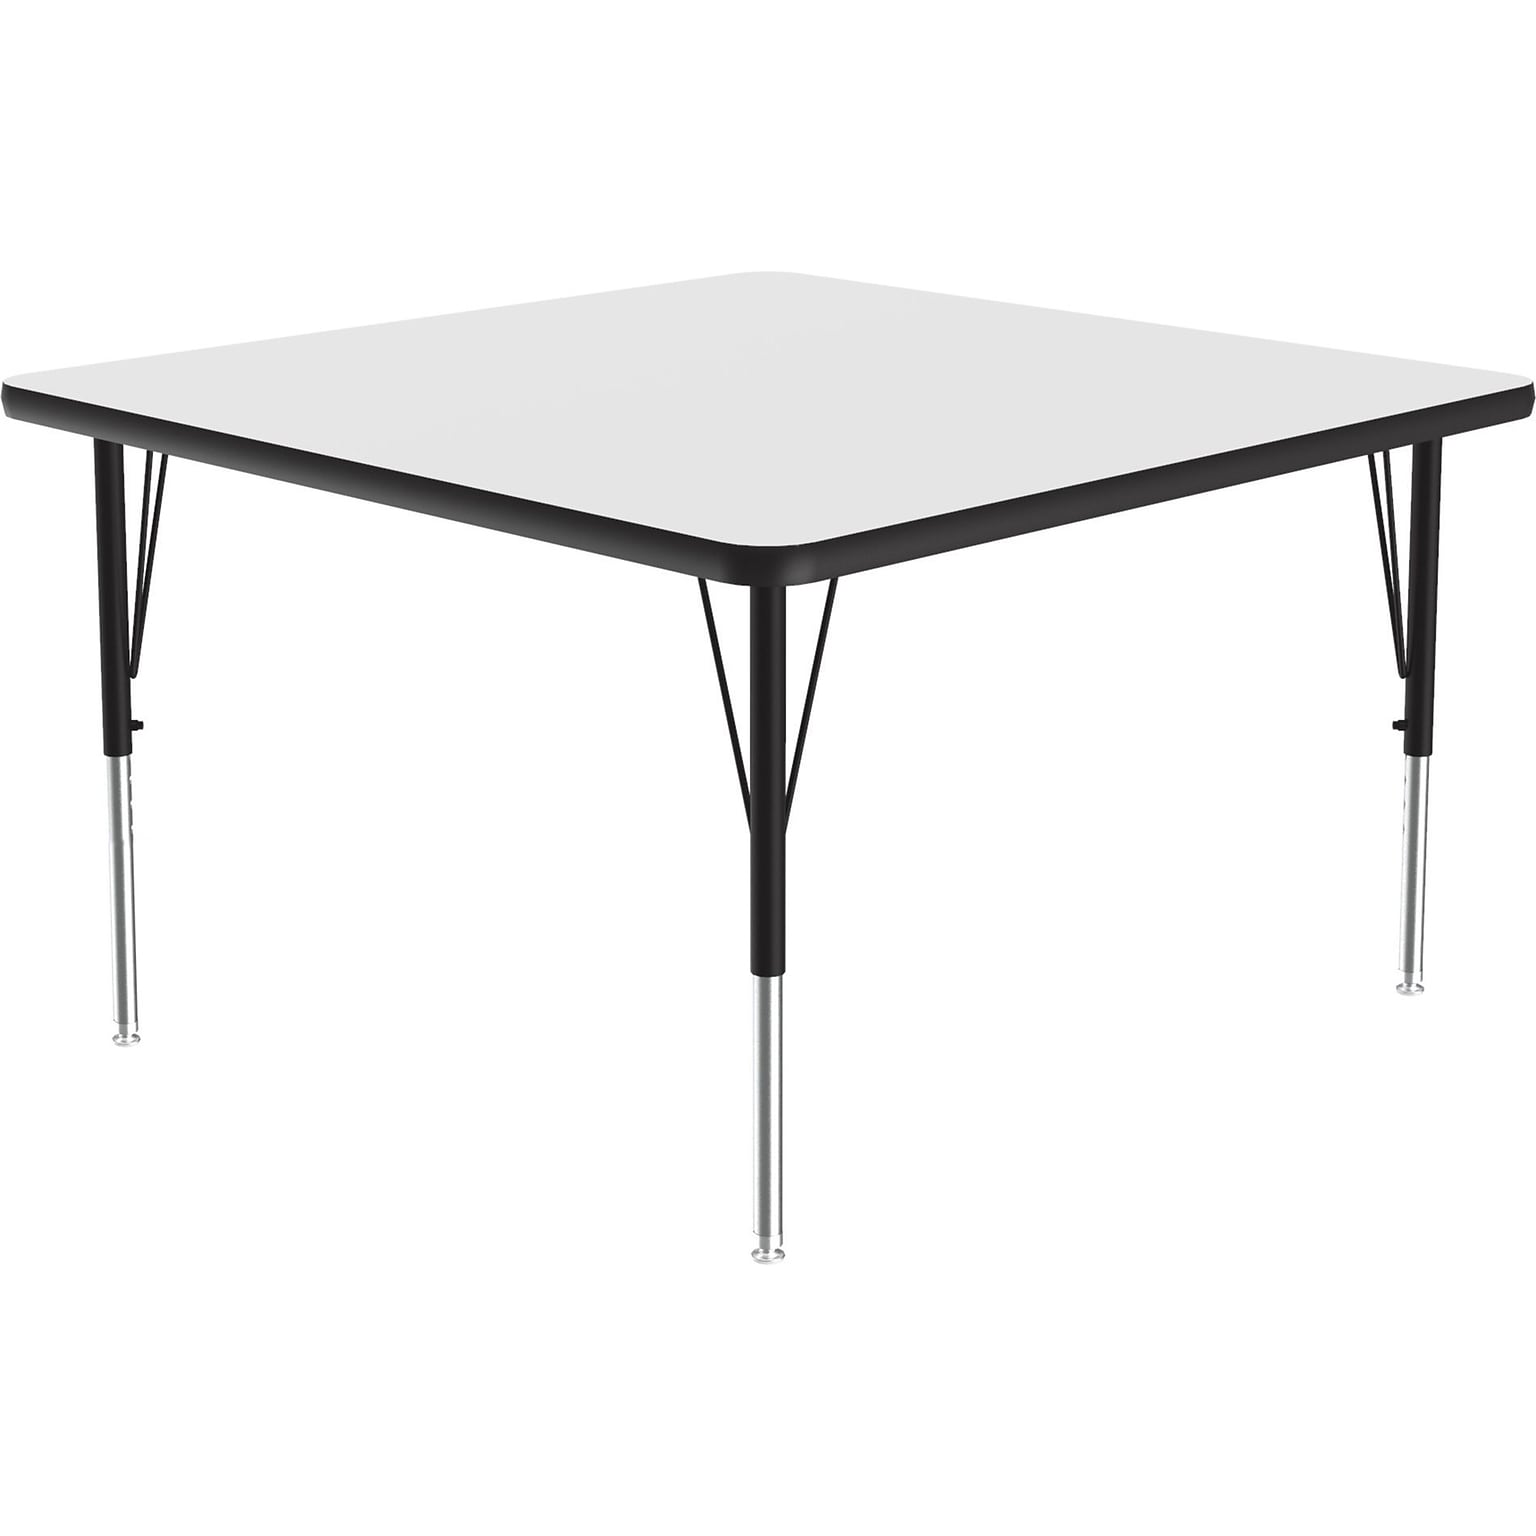 Correll Square Activity Table, 48 x 48, Height-Adjustable, Frosty White/Black (A4848DE-SQ-80)